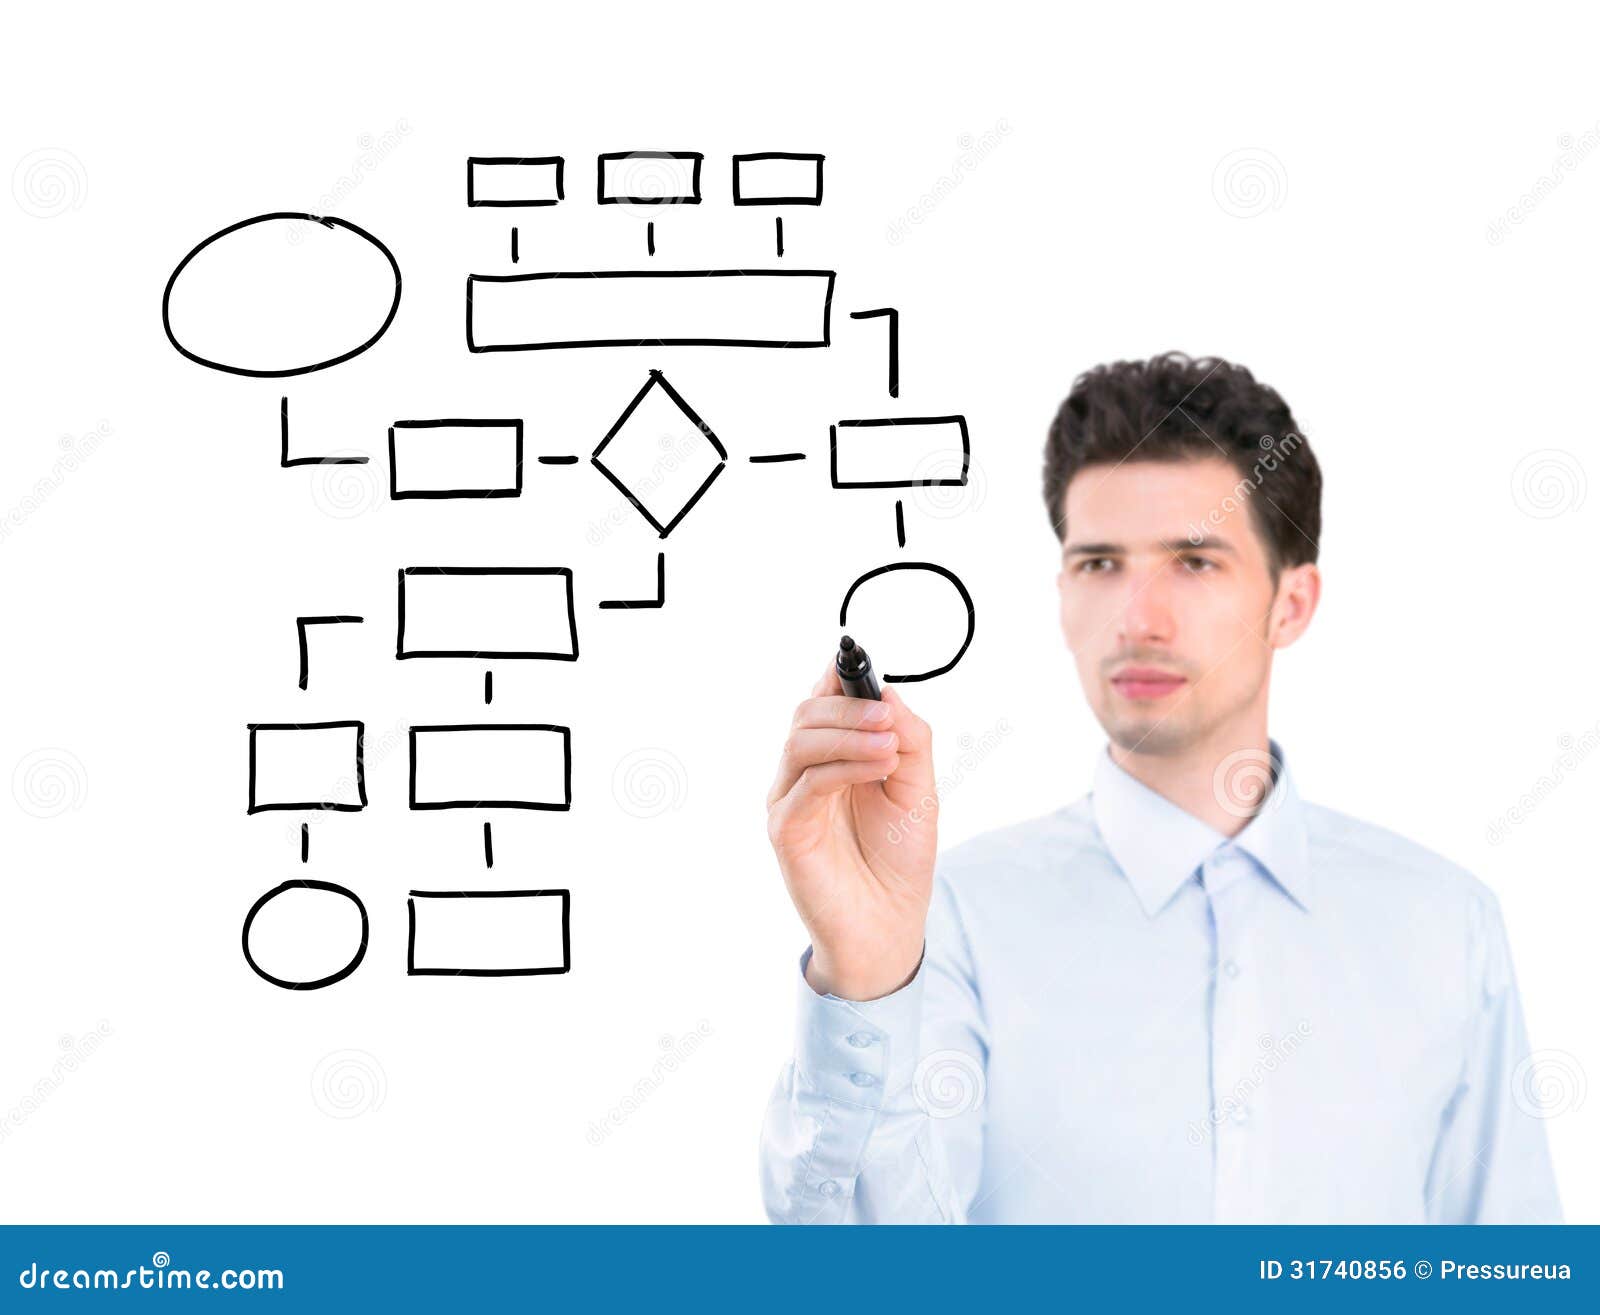 http://thumbs.dreamstime.com/z/businessman-drawing-flowchart-portrait-young-pensive-holding-marker-blank-isolated-white-background-31740856.jpg